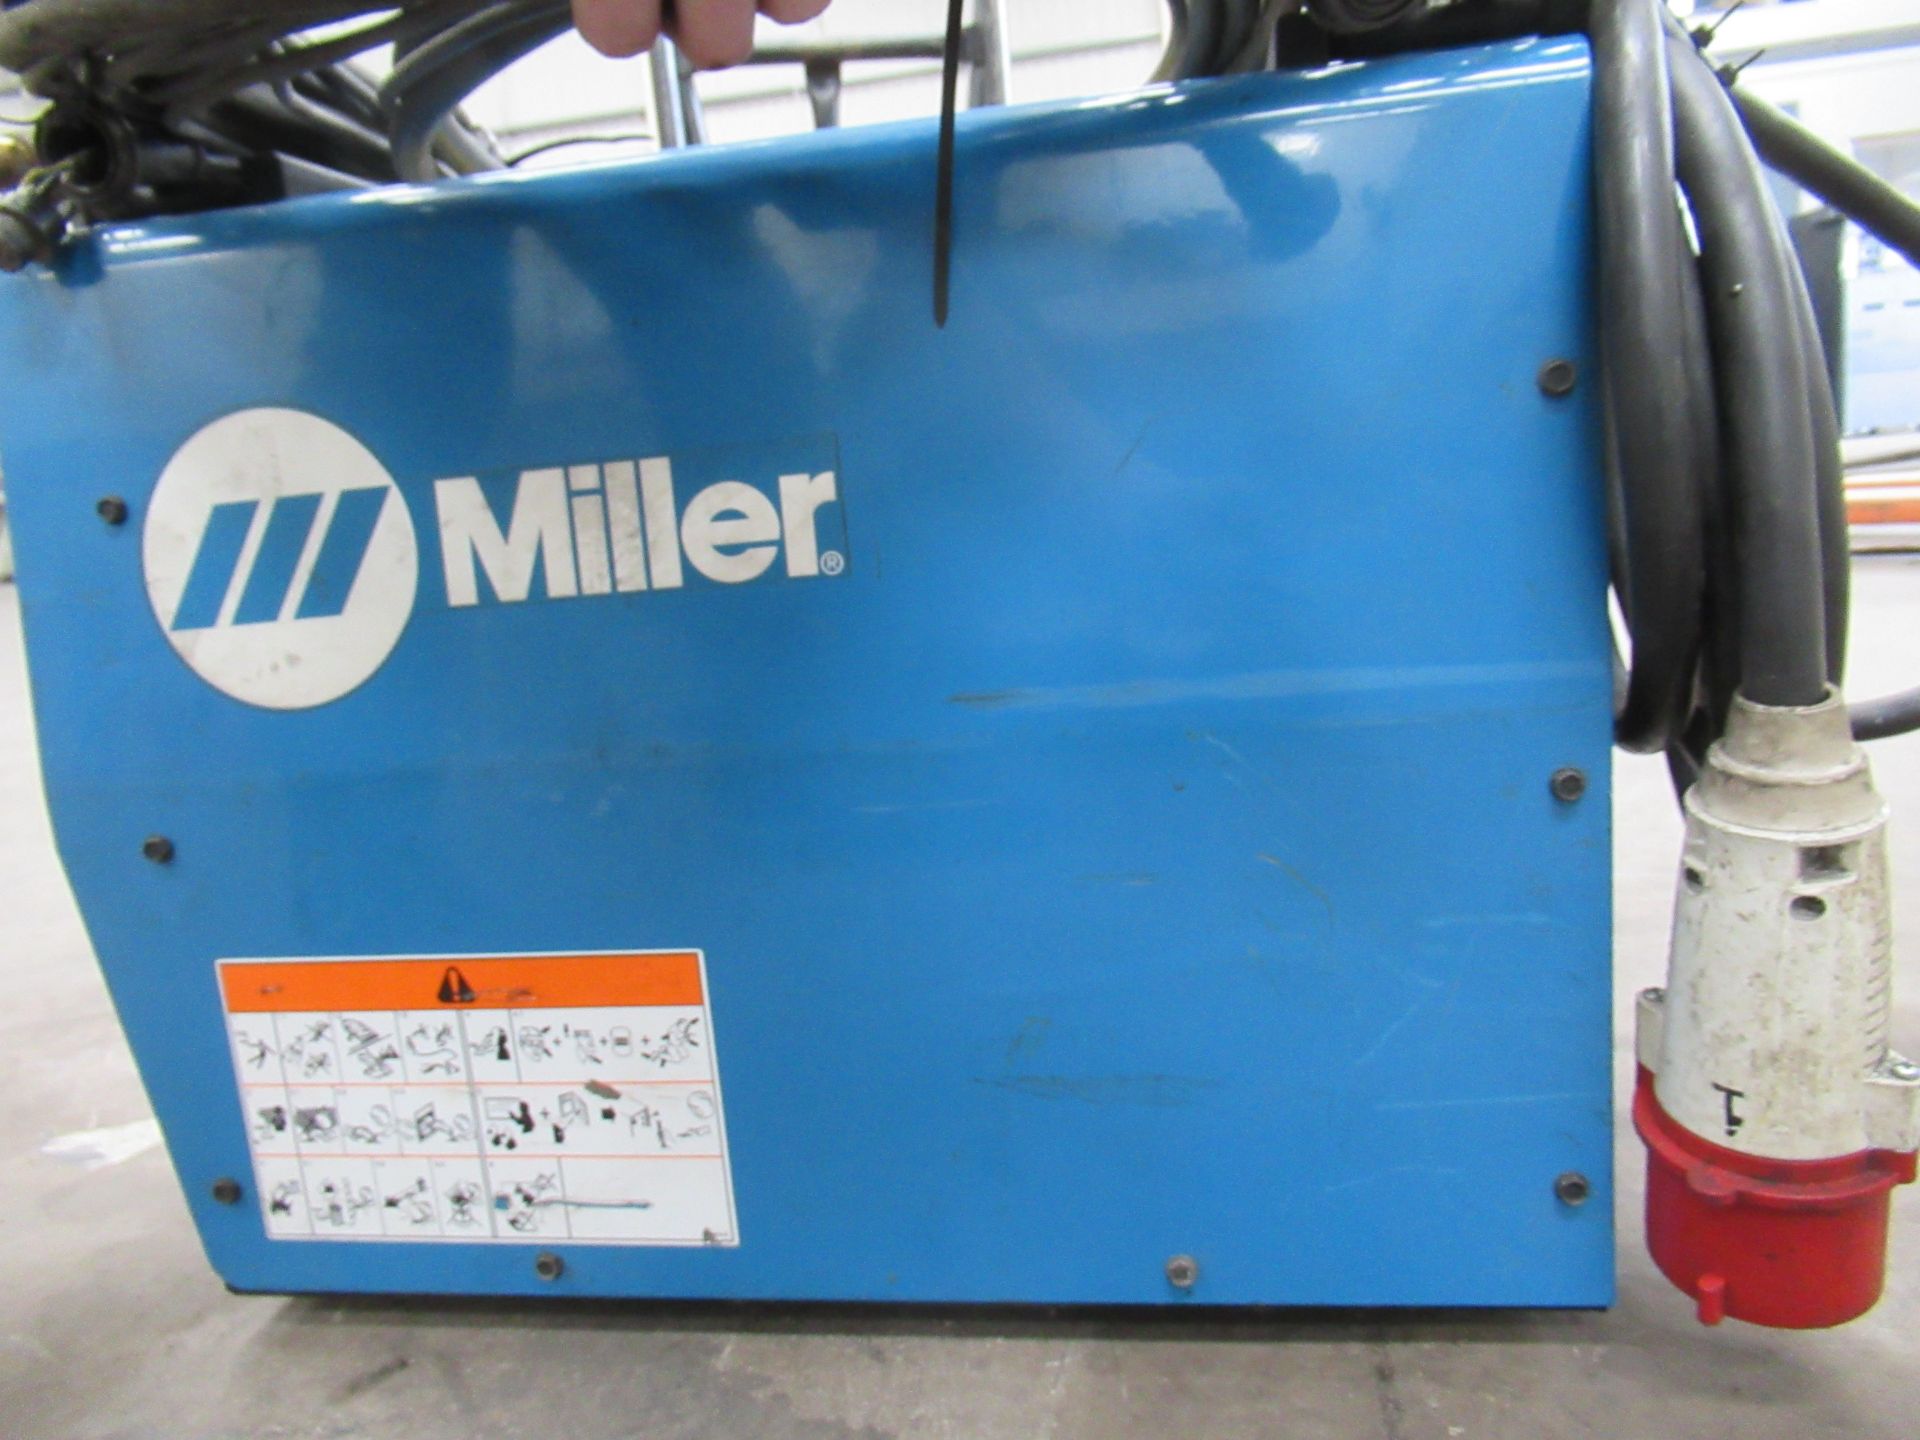 Miller XMT 304 series DC inverter welder with leads etc - Image 3 of 9